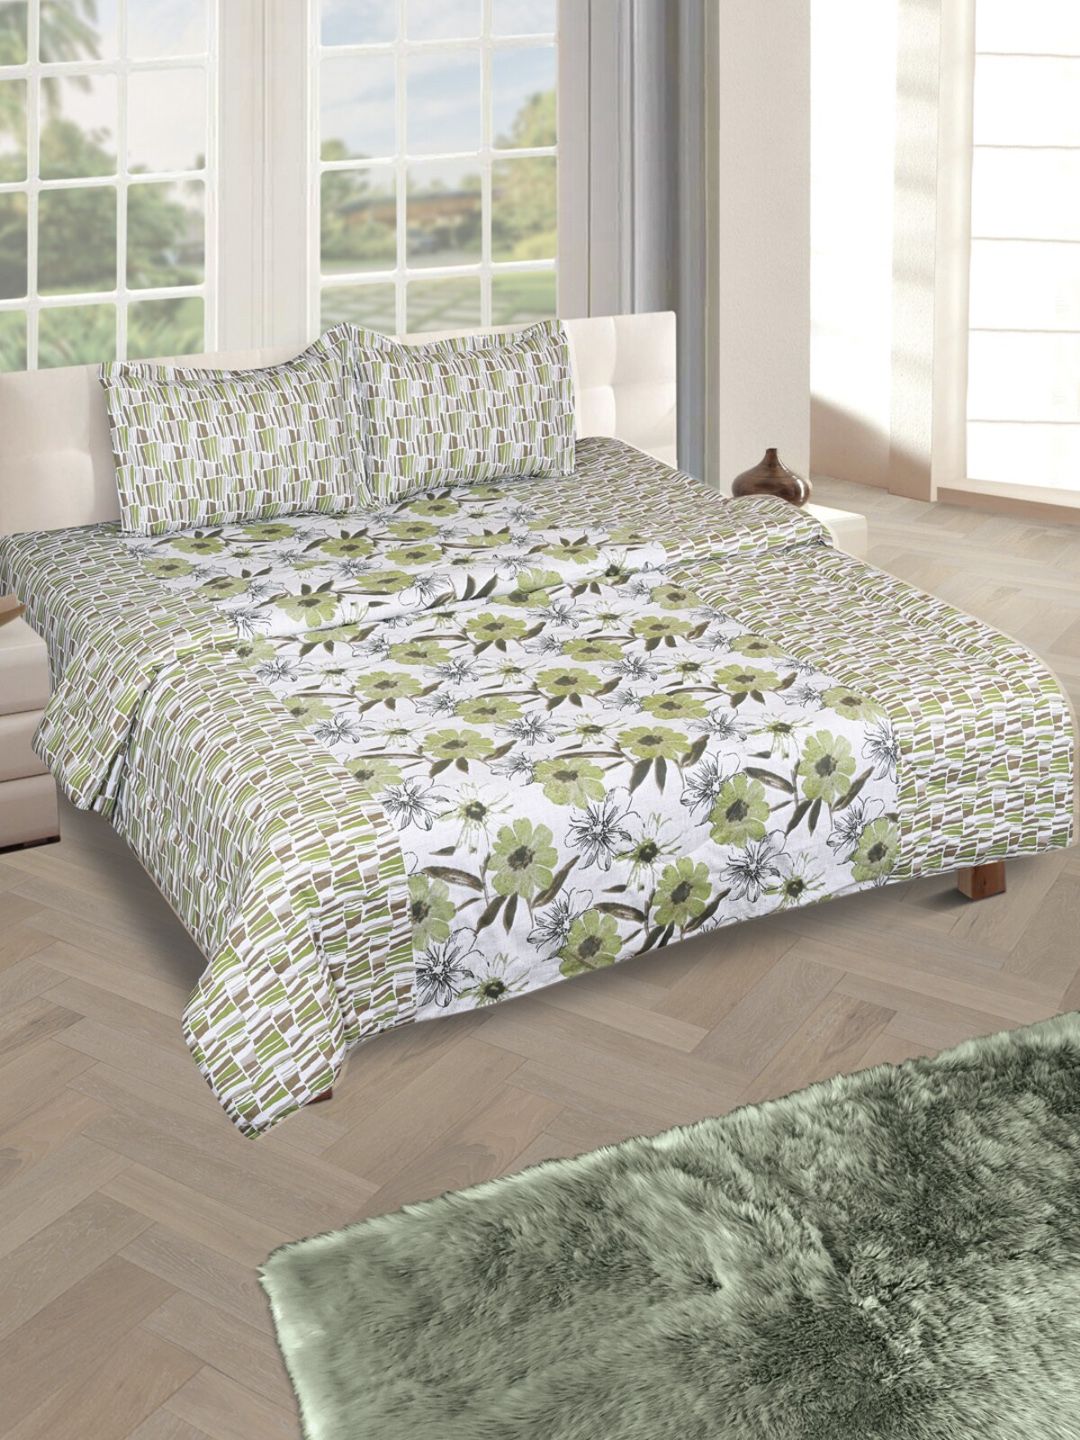 ROMEE Green & White Floral Printed Cotton Double King Bedding Set Price in India